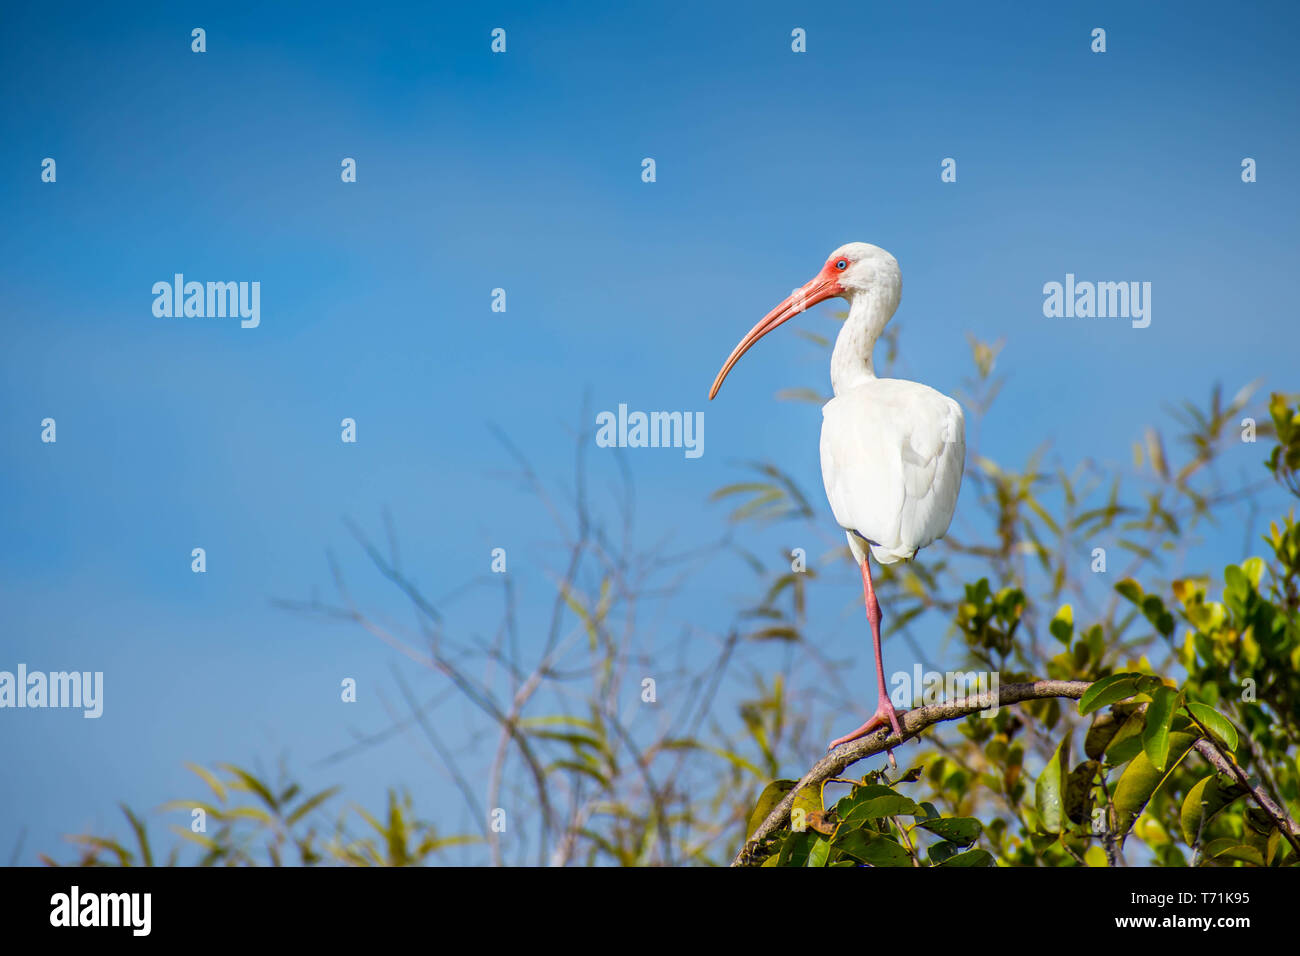 A natural white Ibis in Everglades National Park, Florida Stock Photo